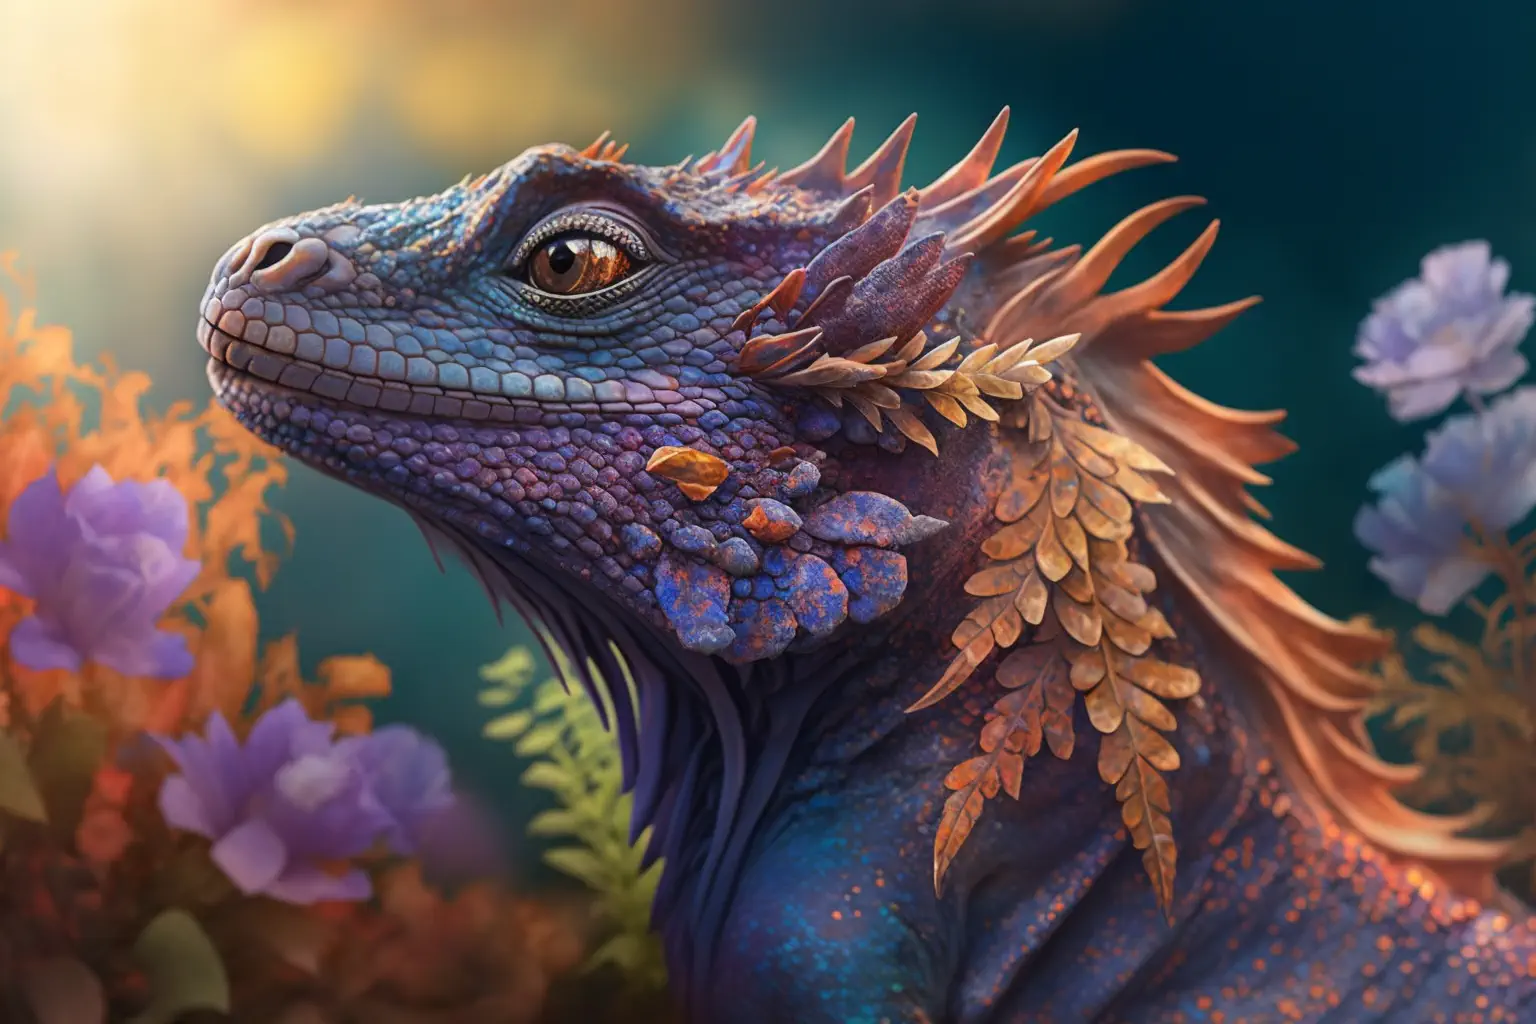 MaggyMage_portrait_of_a_young_beautiful_dragon_with_flowers_bok_cd10fca1-b1b7-466d-bd0f-e41949e6c08b